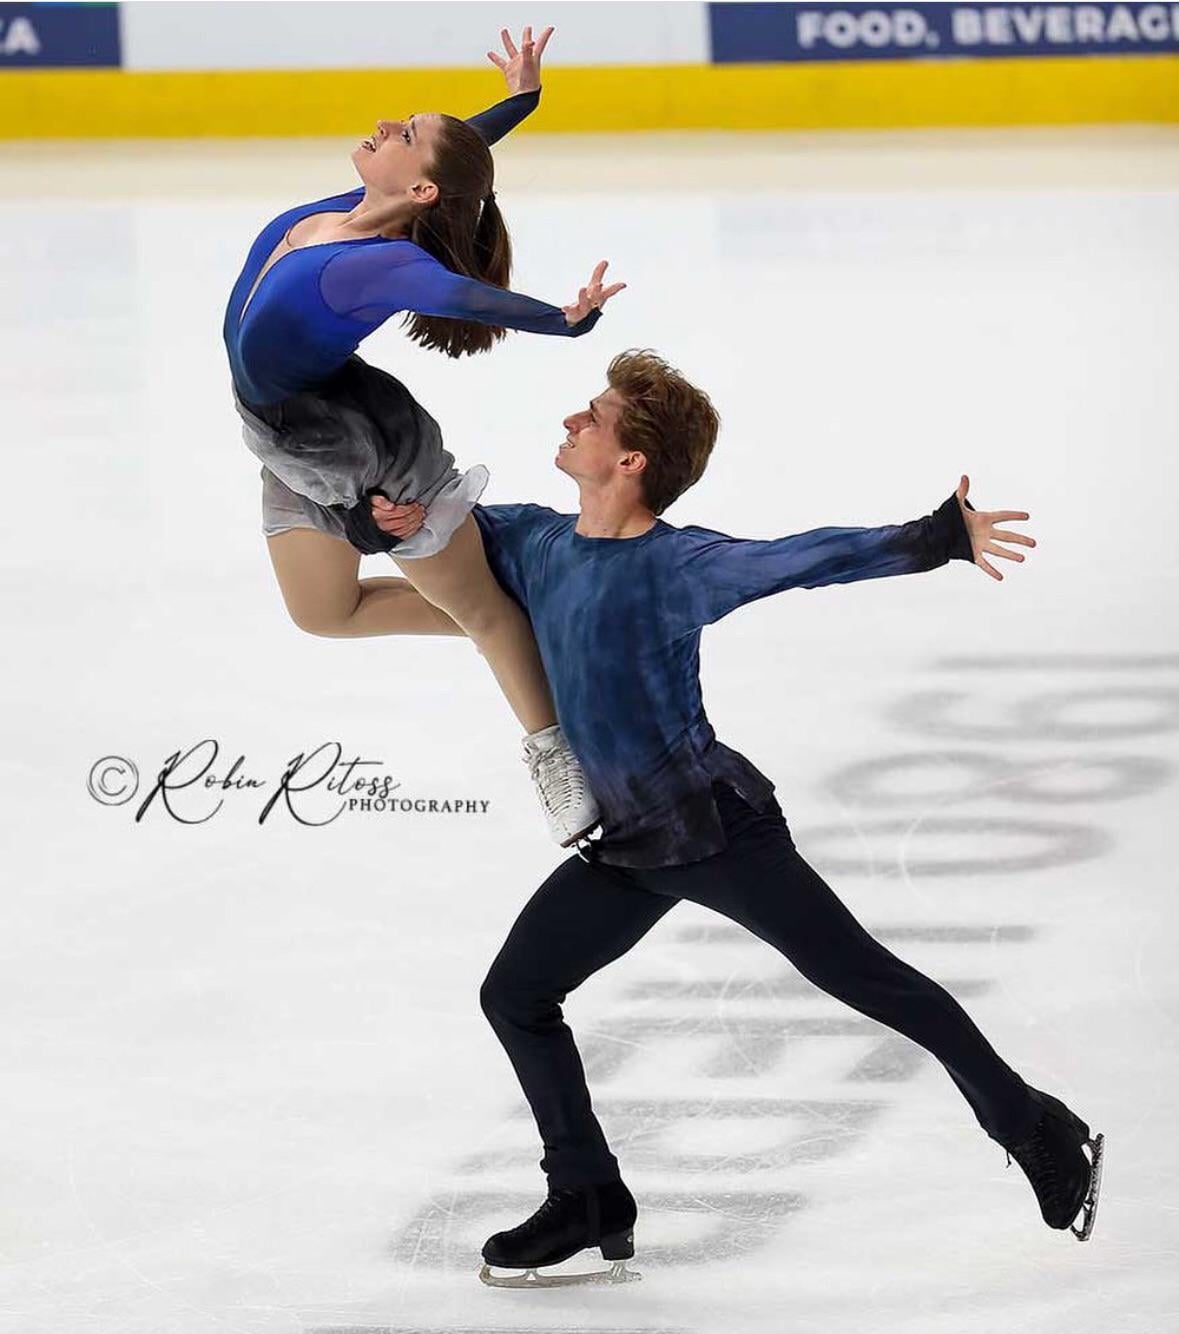 in-your-opinion-what-are-the-best-ice-dance-lifts-v0-rrf94iwbyuzb1.jpeg